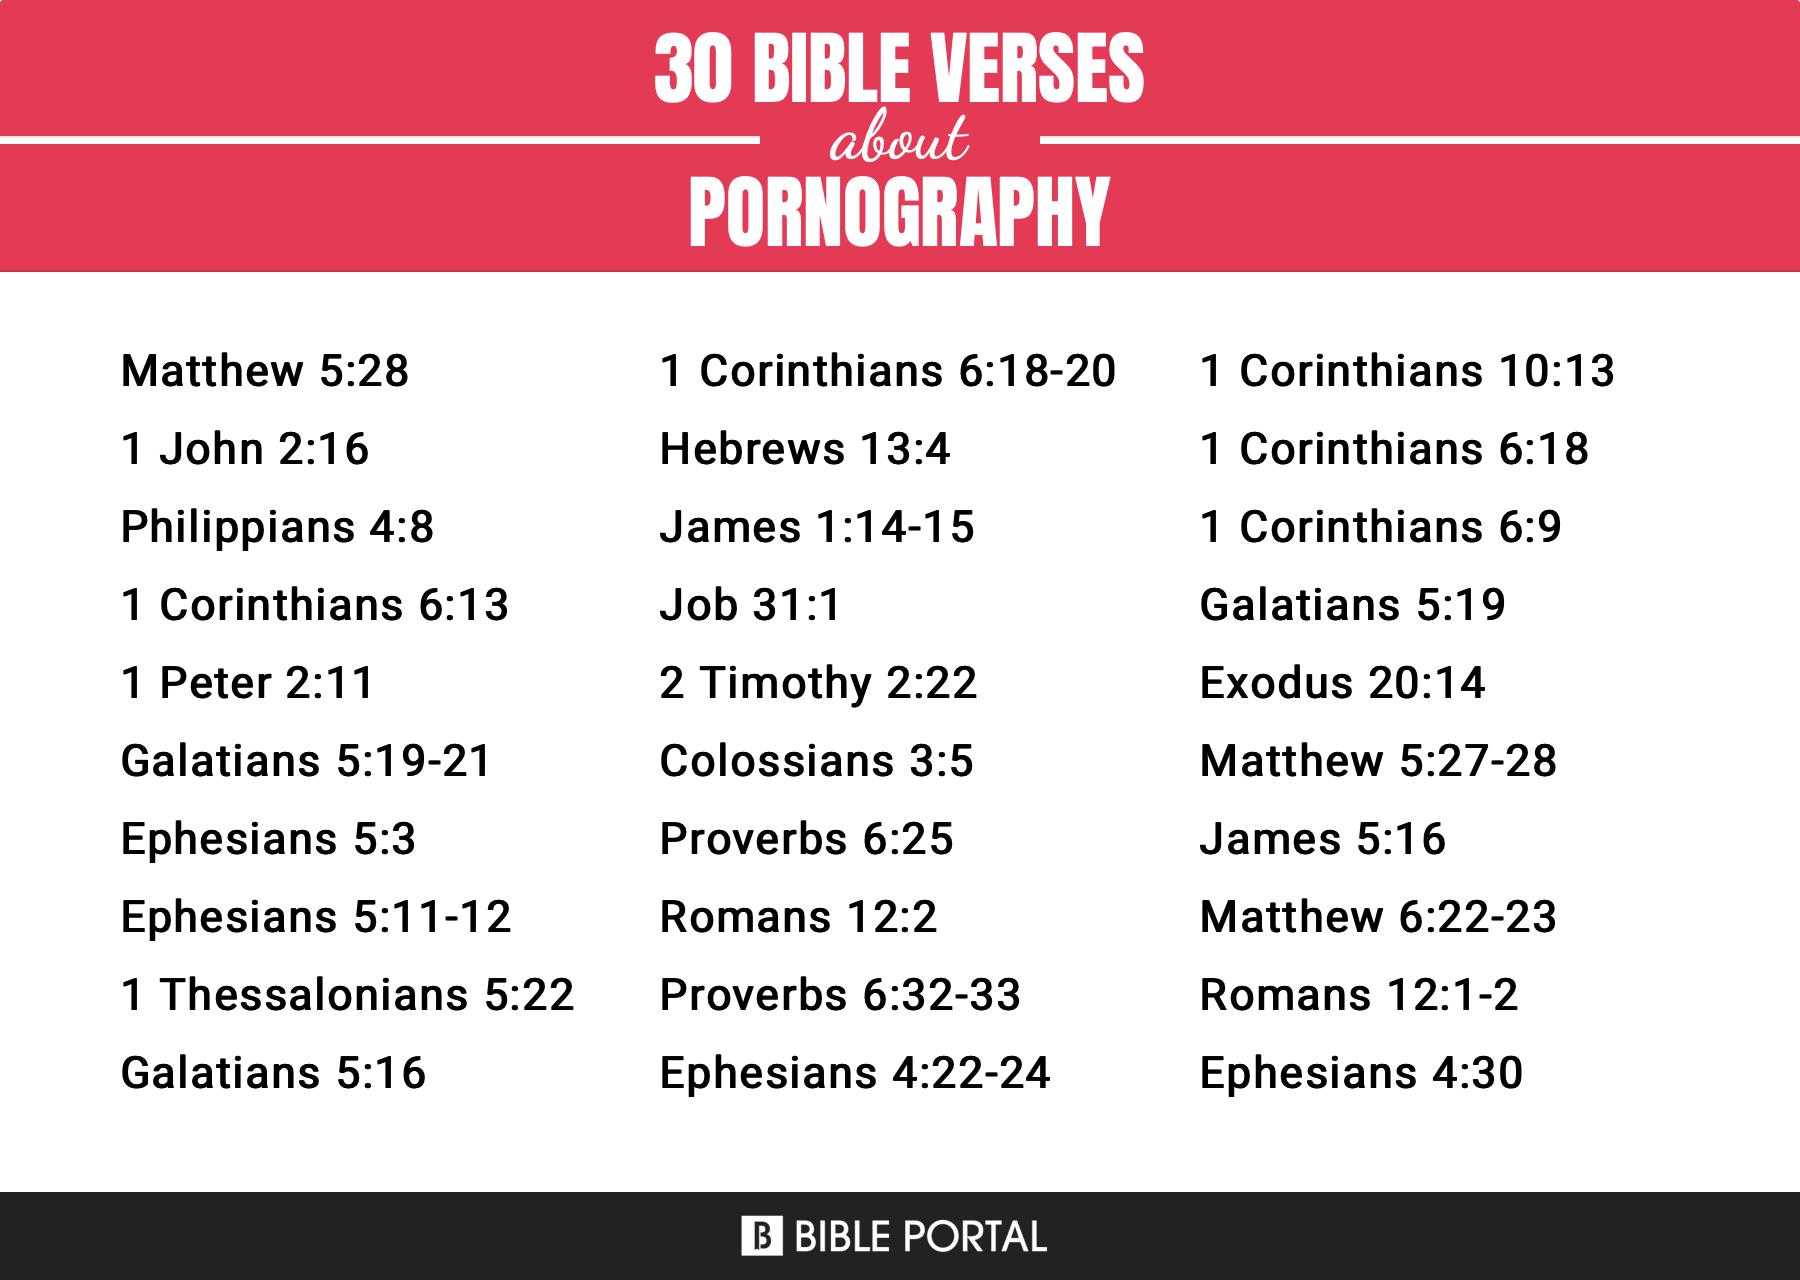 Porn Bible Com - What Does the Bible Say about Pornography?